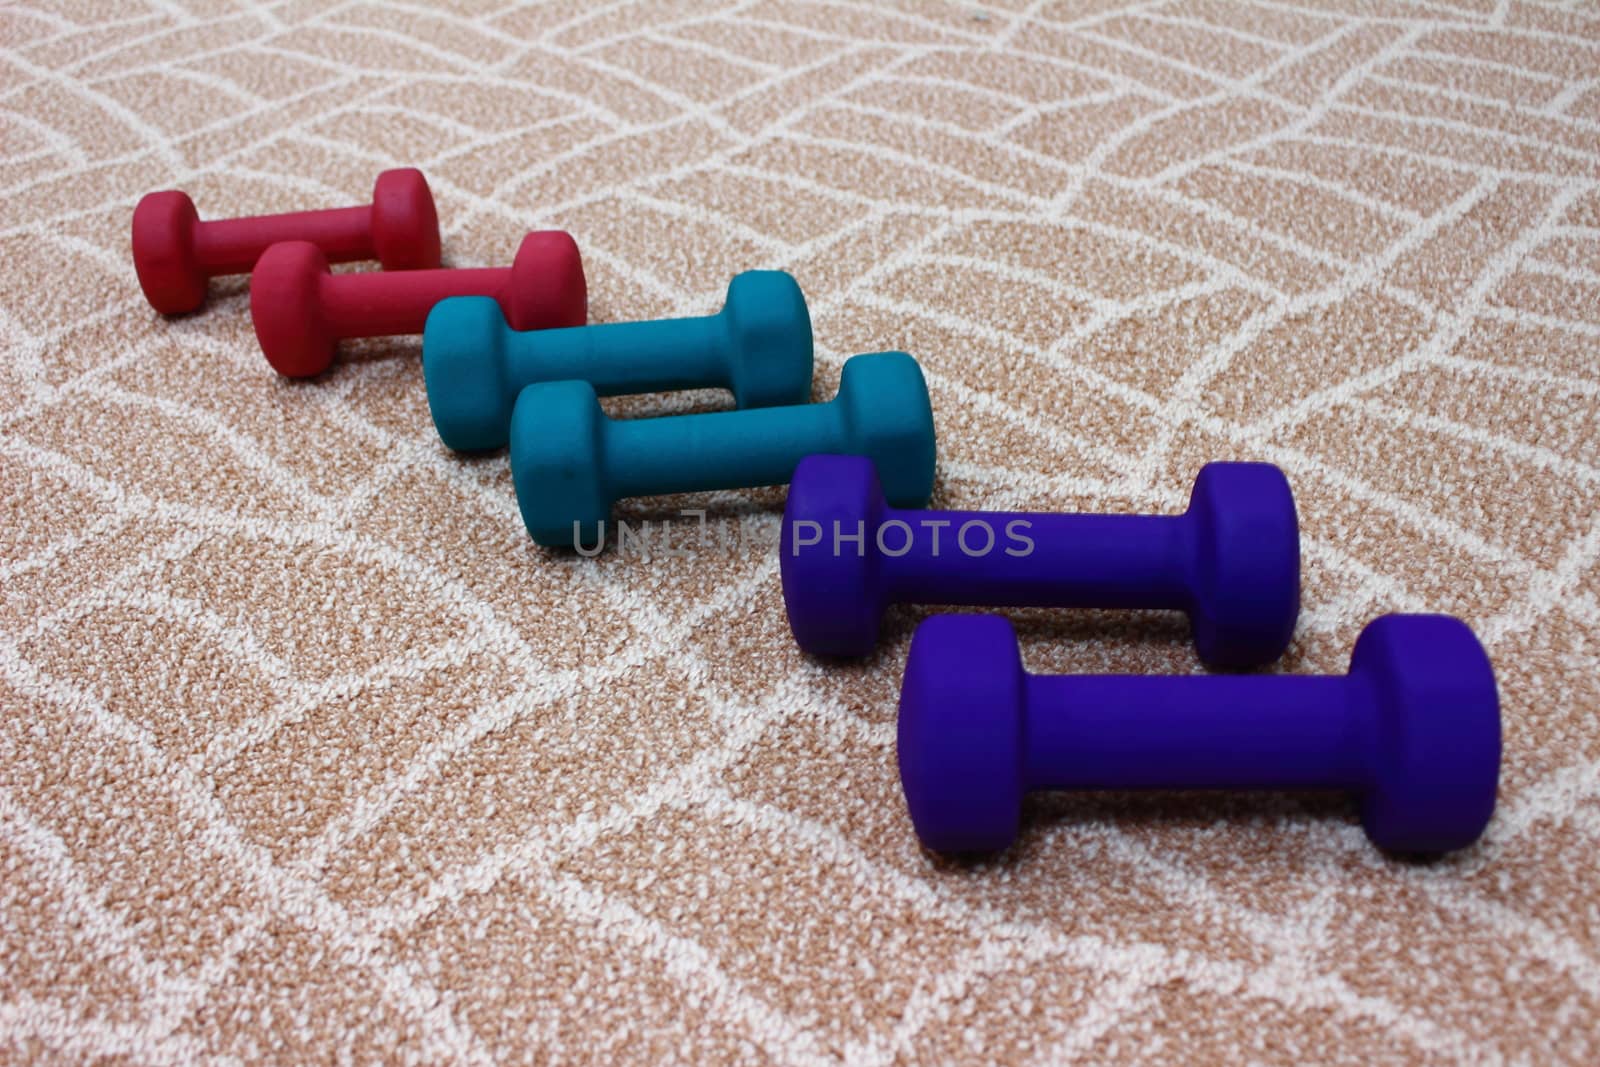 Six dumbbells lie on the carpet, ready for sports